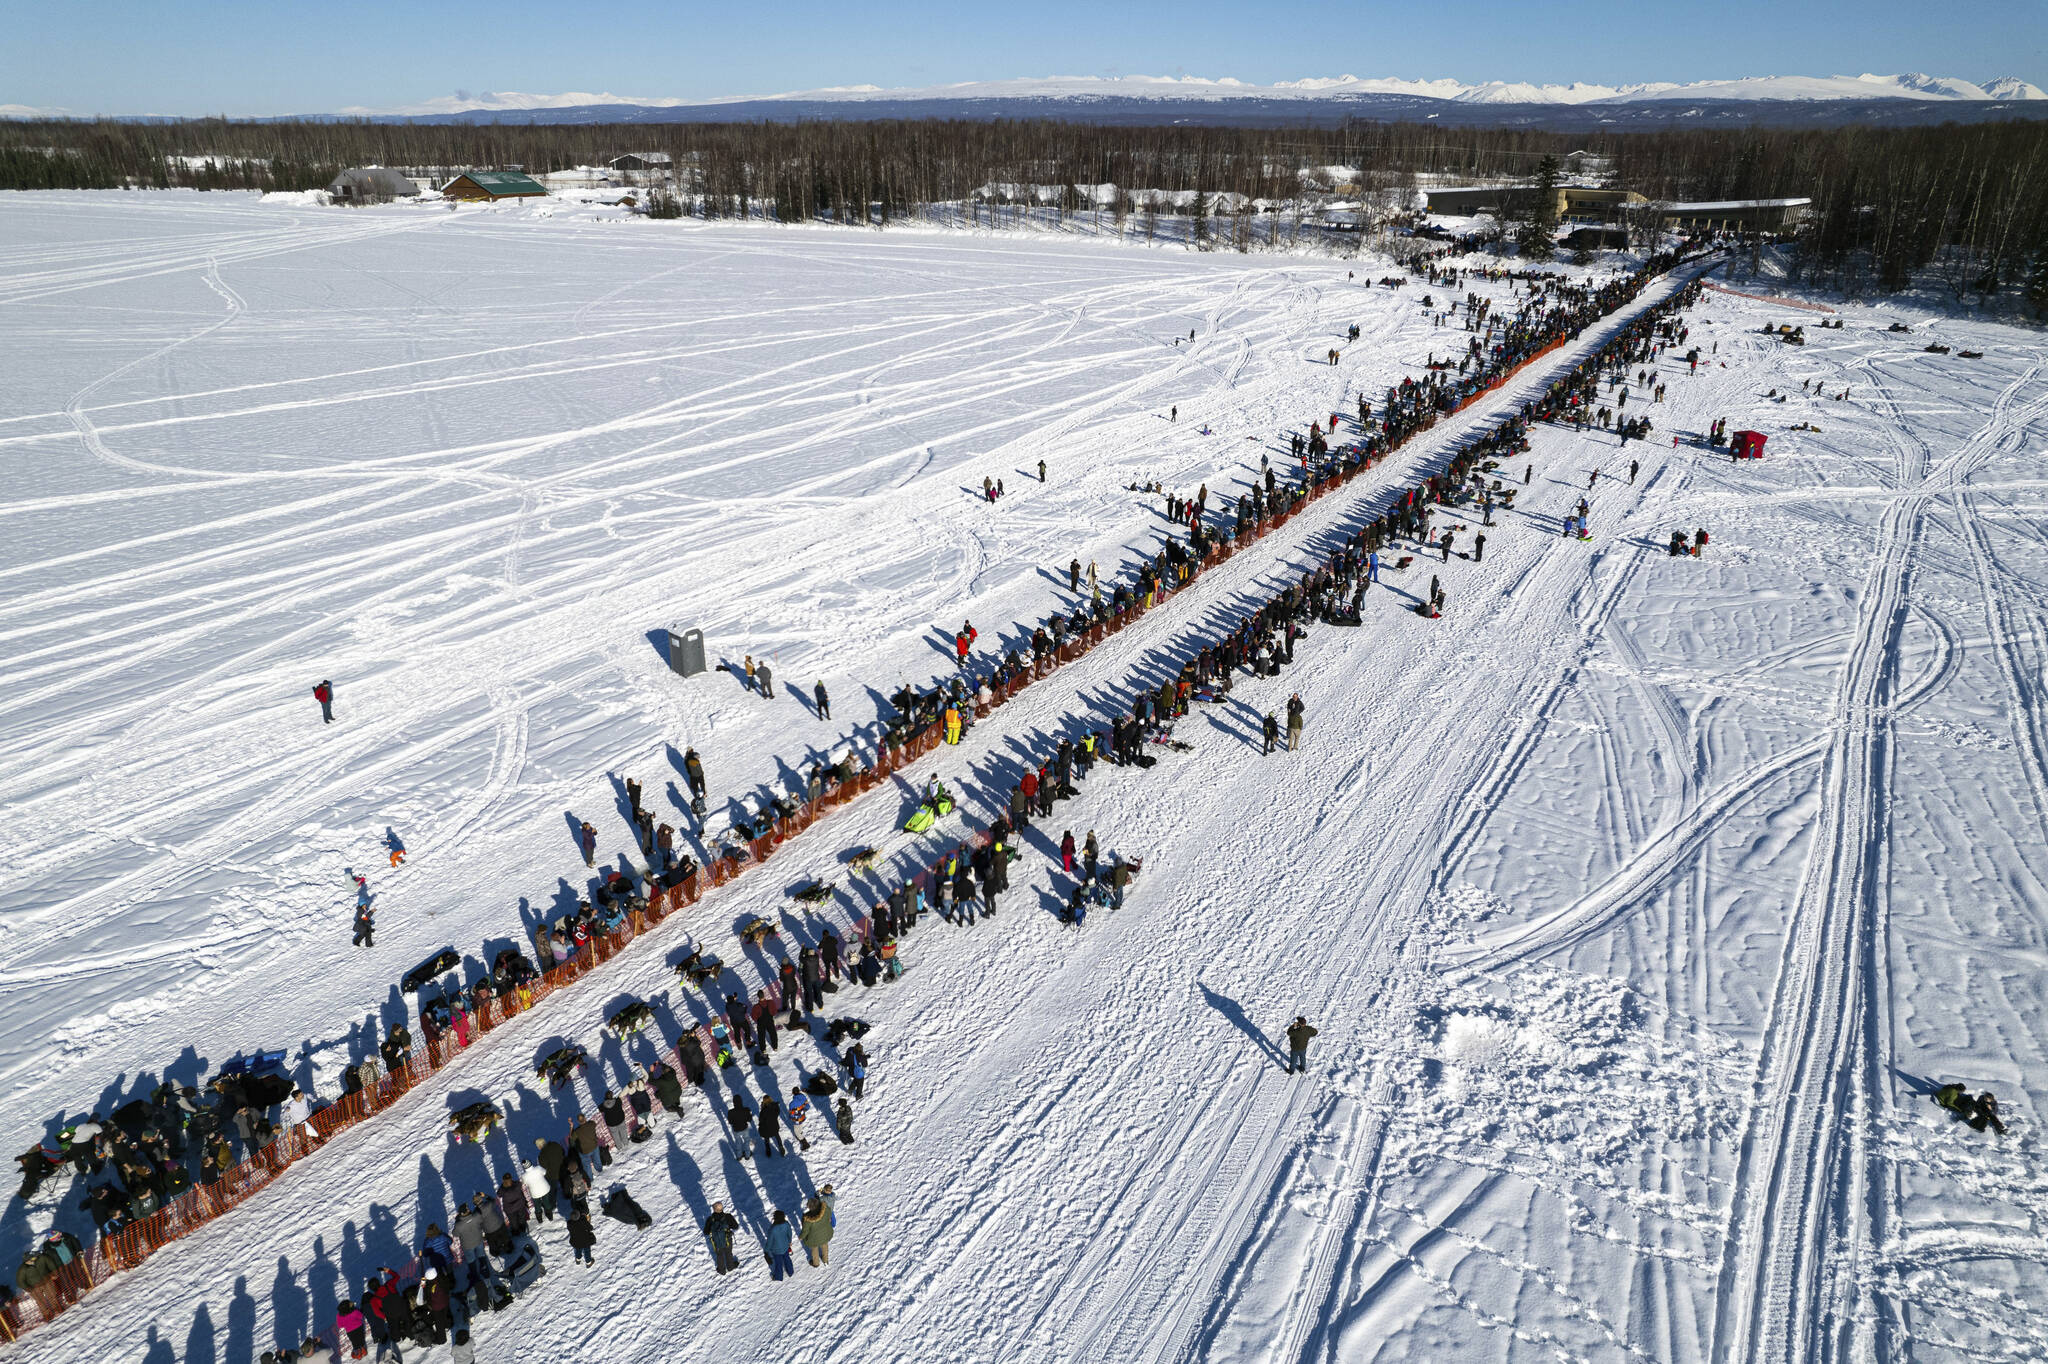 A competitor mushes across Willow Lake during the restart of the Iditarod Trail Sled Dog Race on March 6, 2022, in Willow, Alaska. Two back-of-the-pack mushers had to be rescued in separate incidents from race Friday, March 18, after winds from a severe ground storm caused deteriorating conditions, race officials said. (Loren Holmes / Anchorage Daily News)